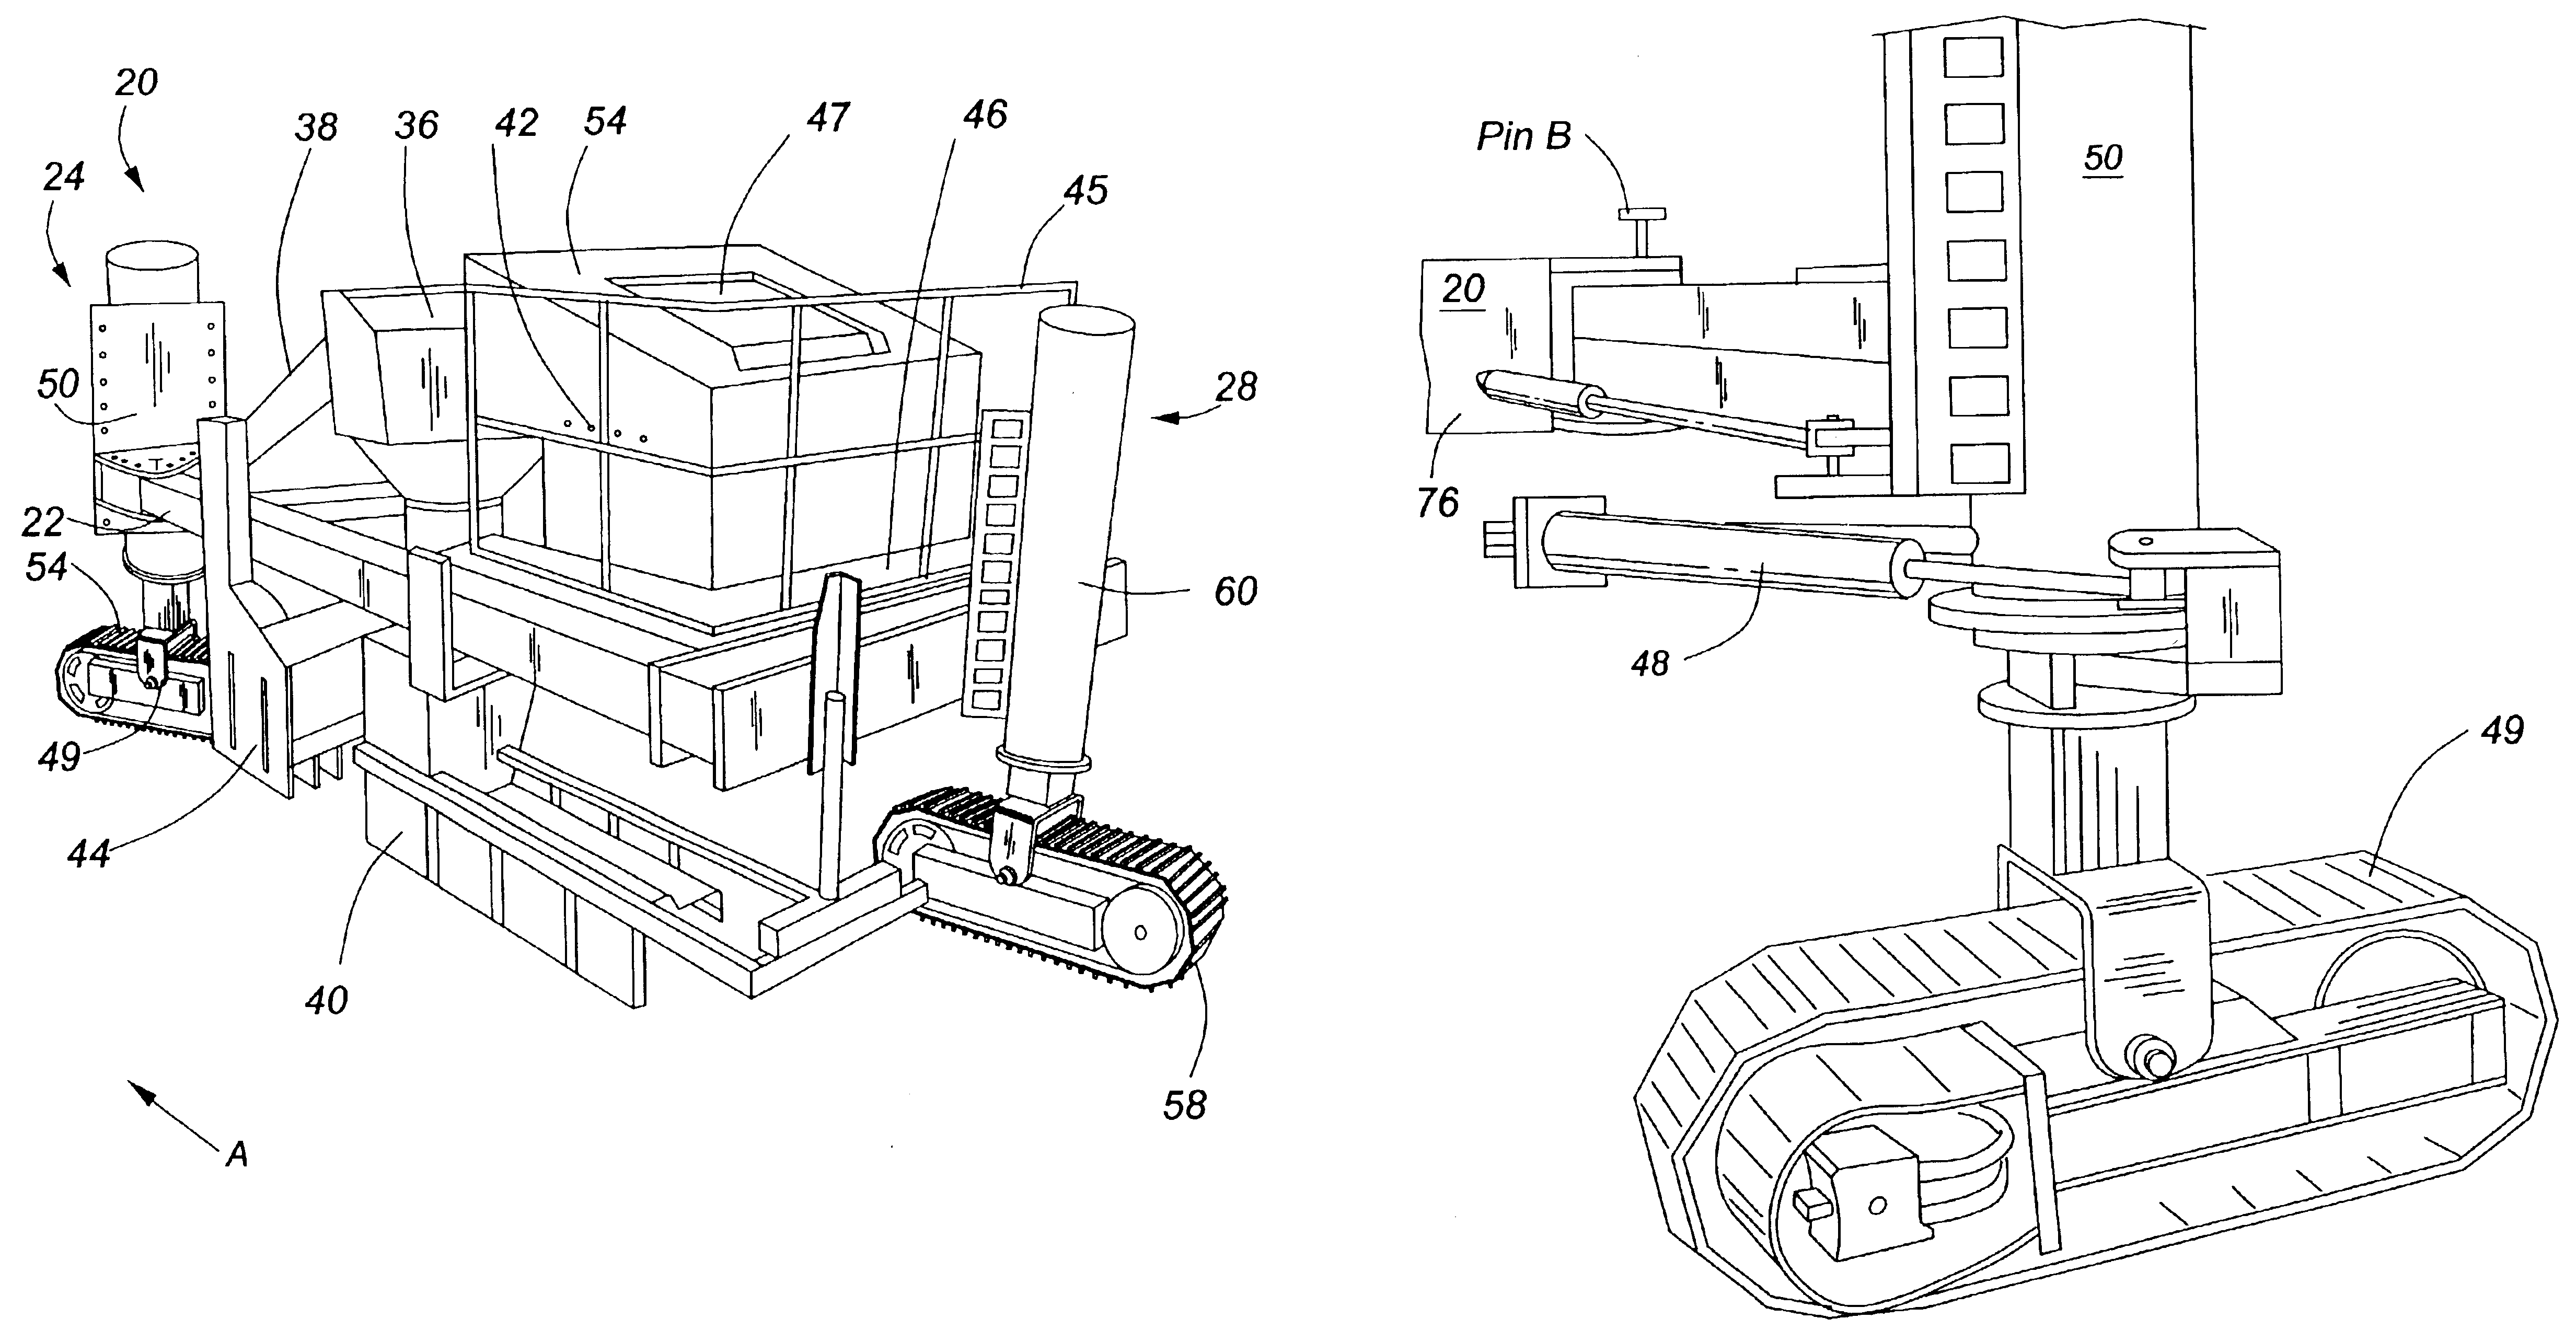 Device for forming tight radius curbs and gutters with a paving machine